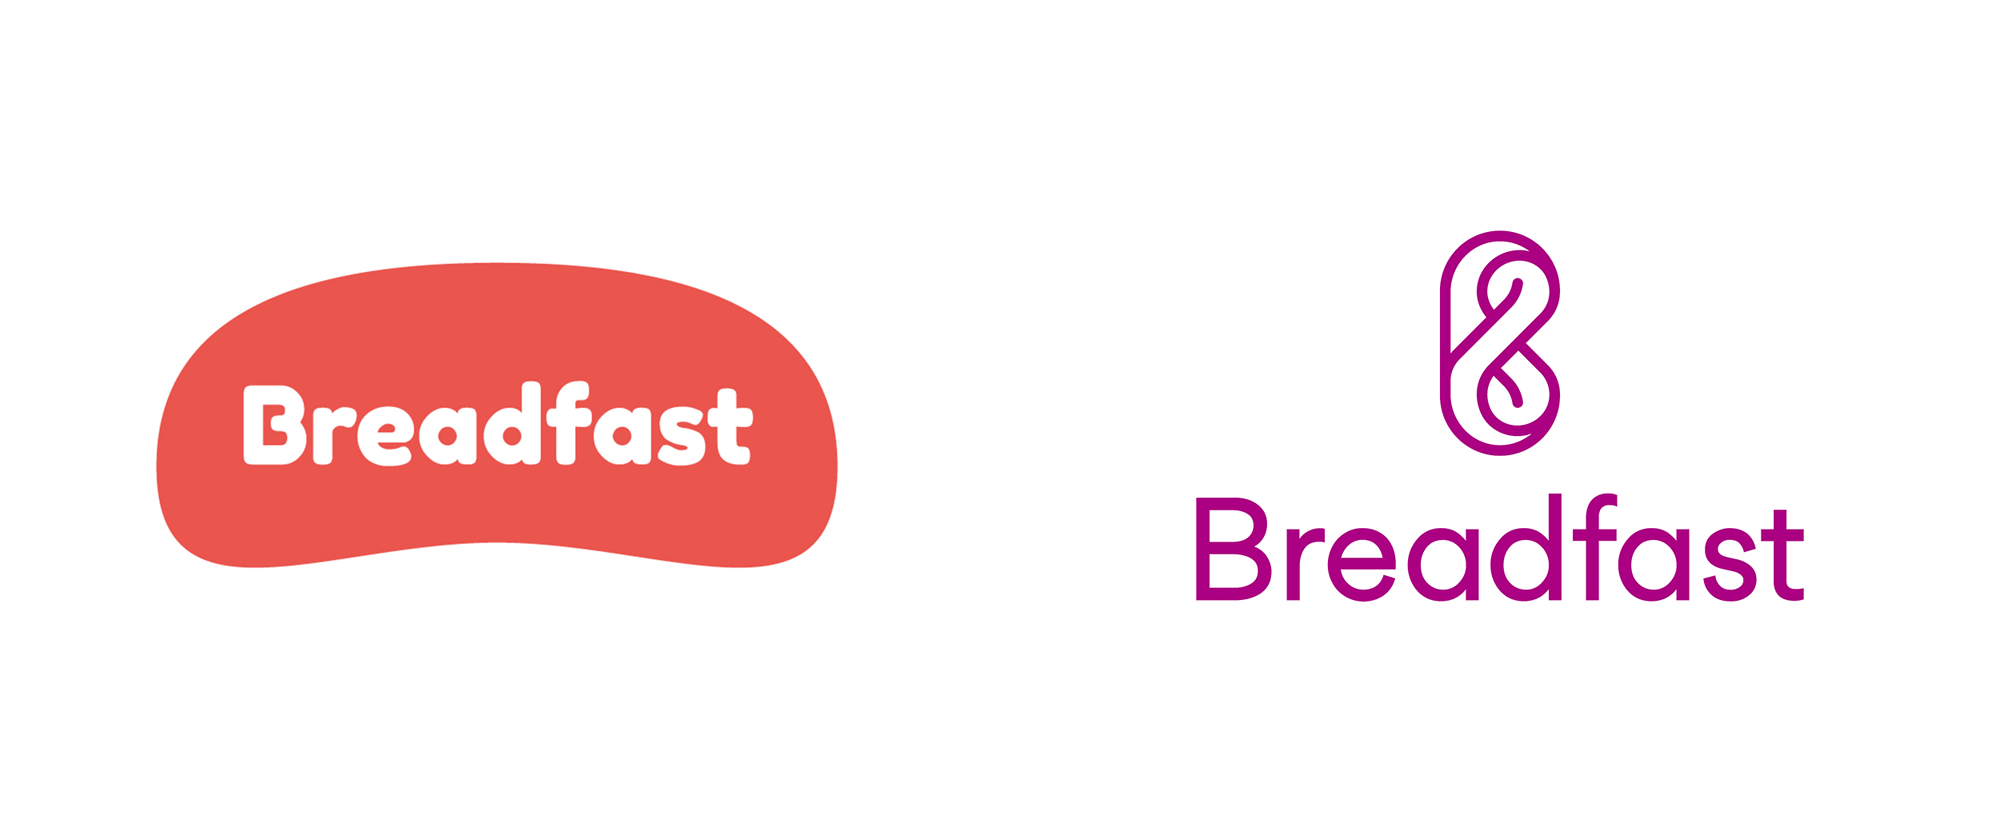 New Logo and Identity for Breadfast by Mohamed Samir